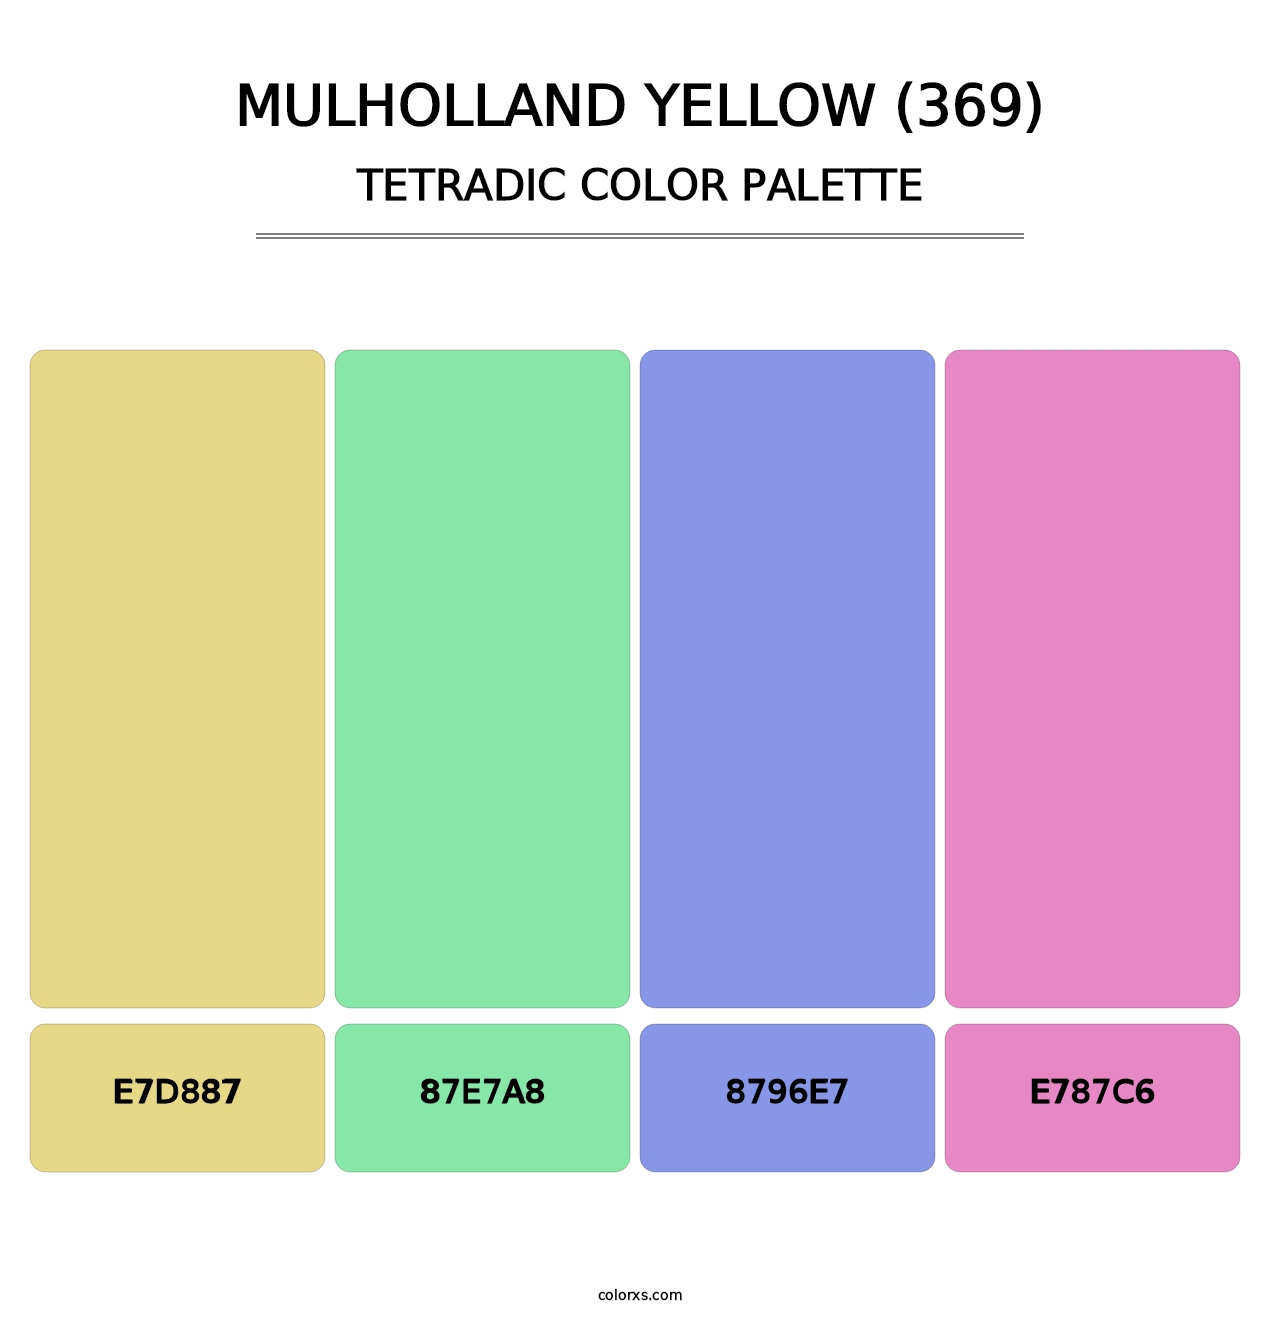 Mulholland Yellow (369) - Tetradic Color Palette